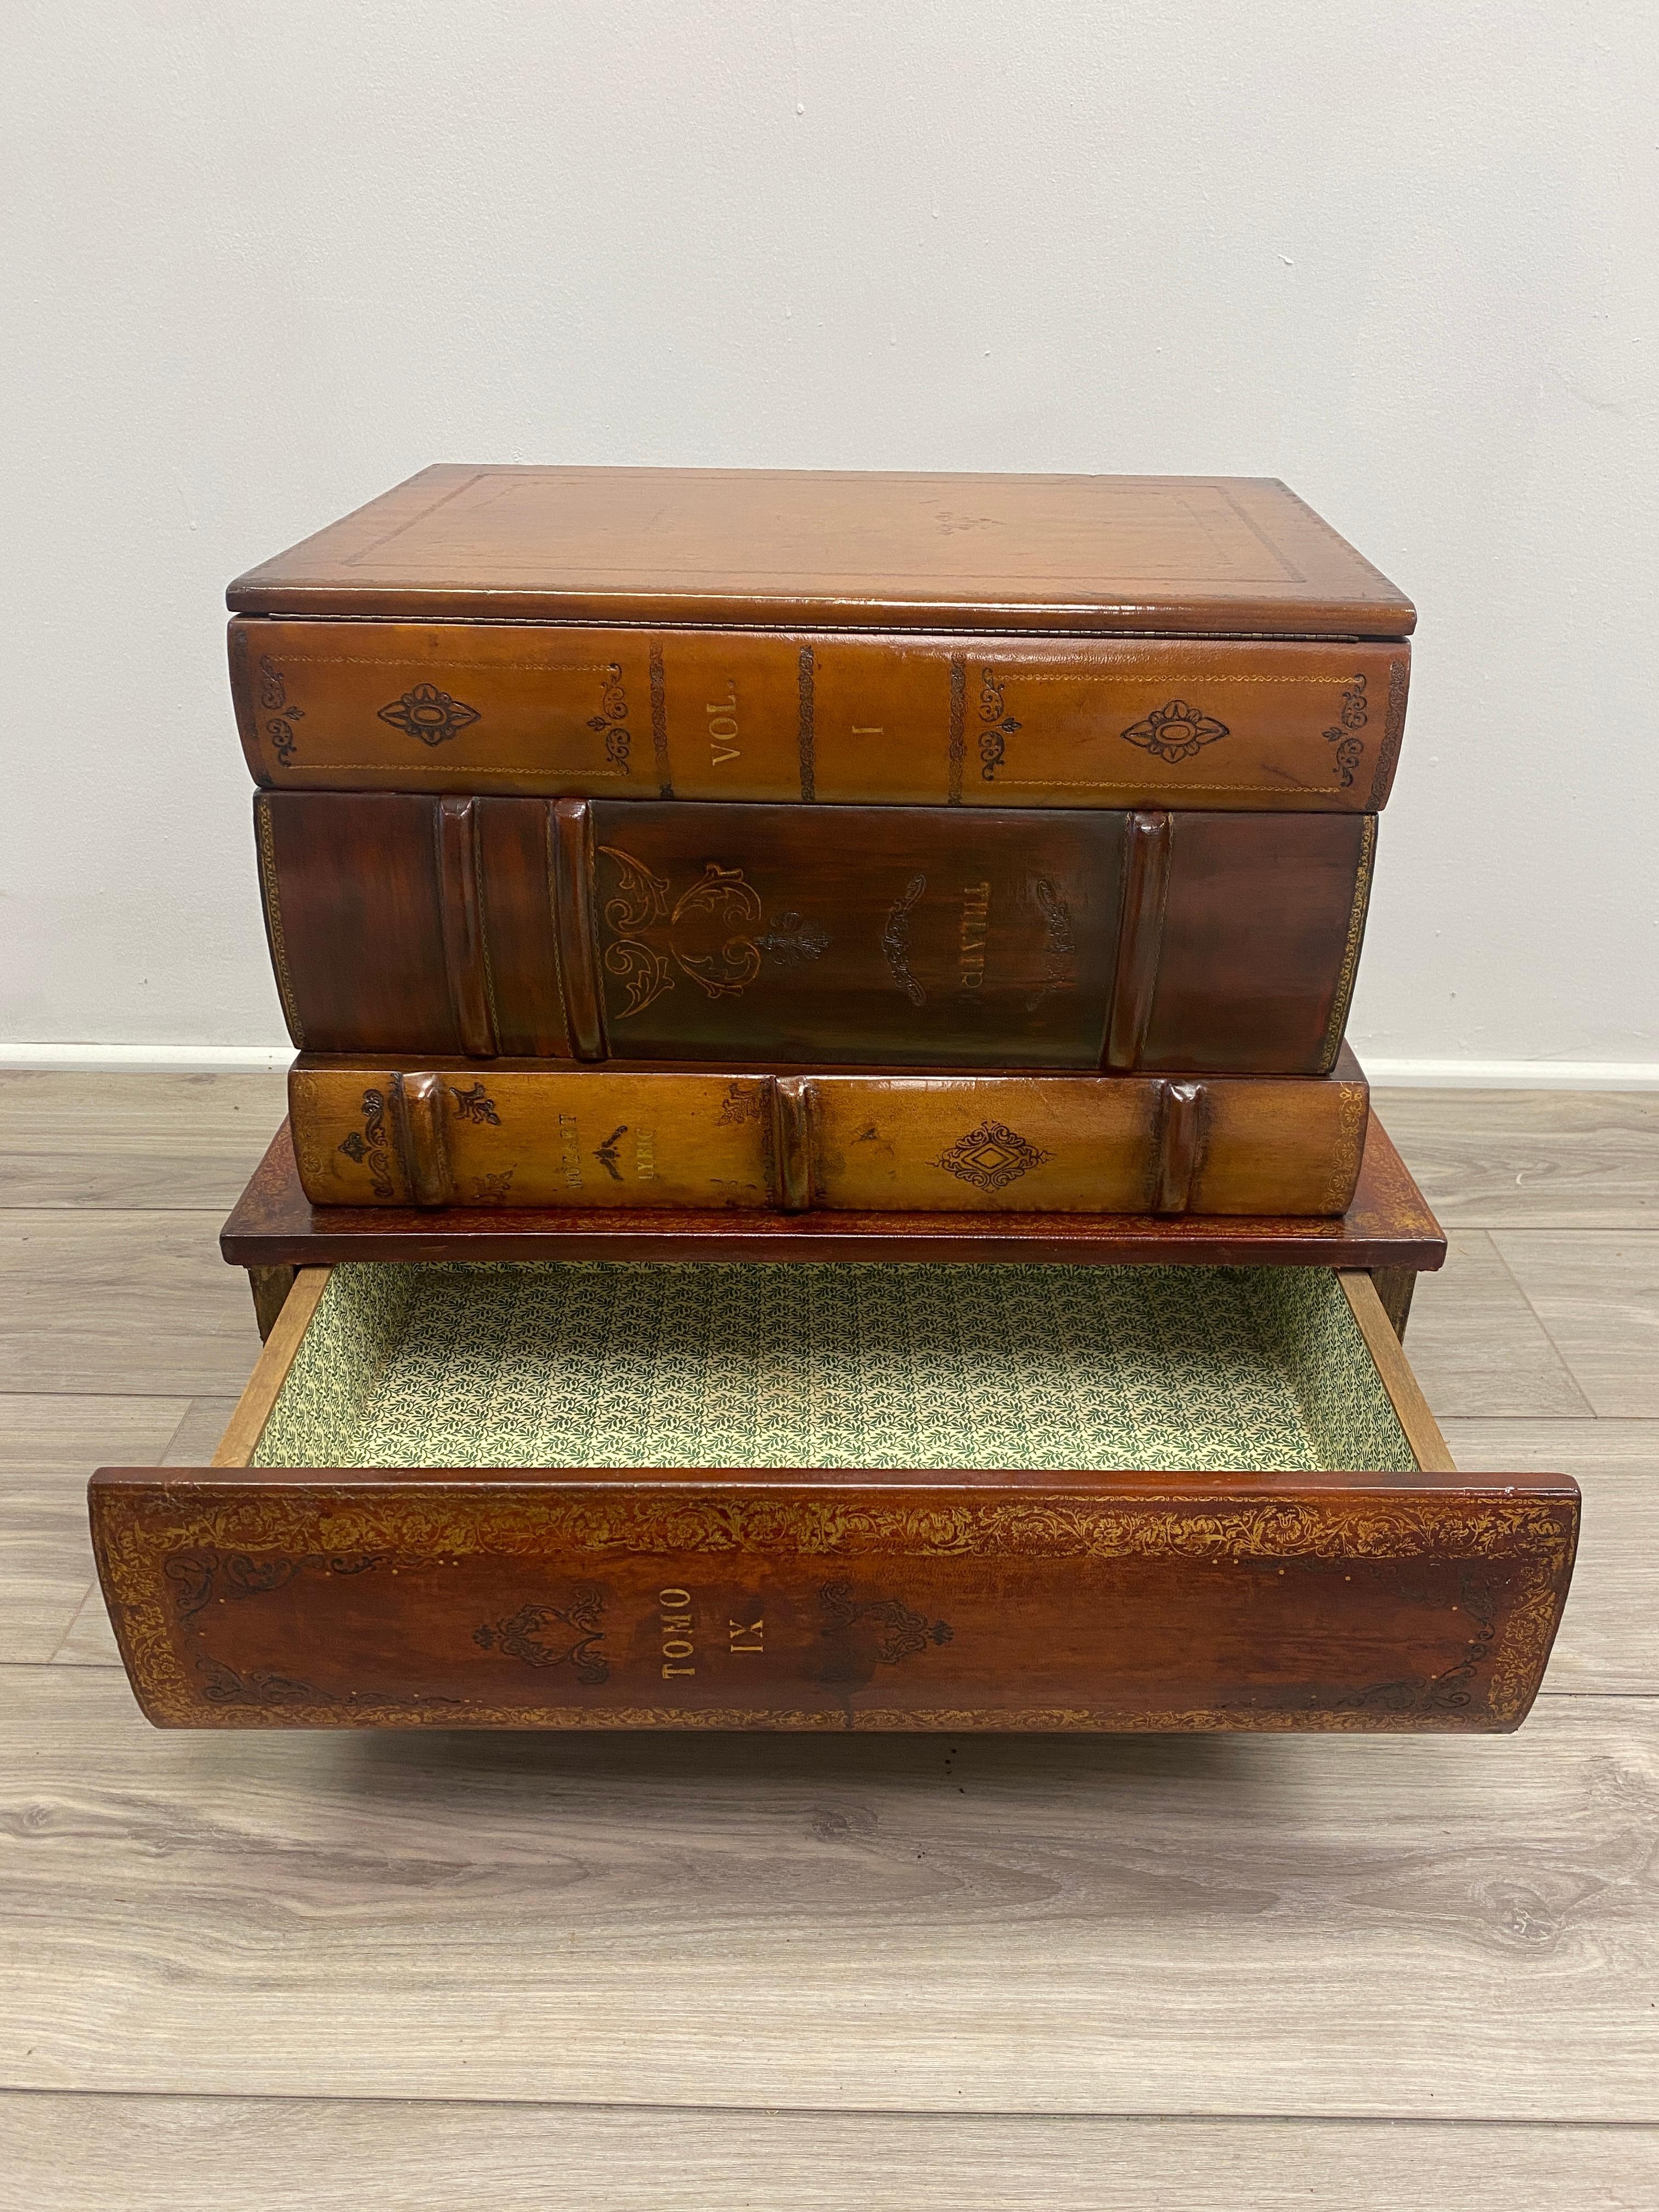 Well made Italian faux stand in book form with tooled leather. Top open to reveal storage, one drawer. Resting on four turned feet. French polished leather.